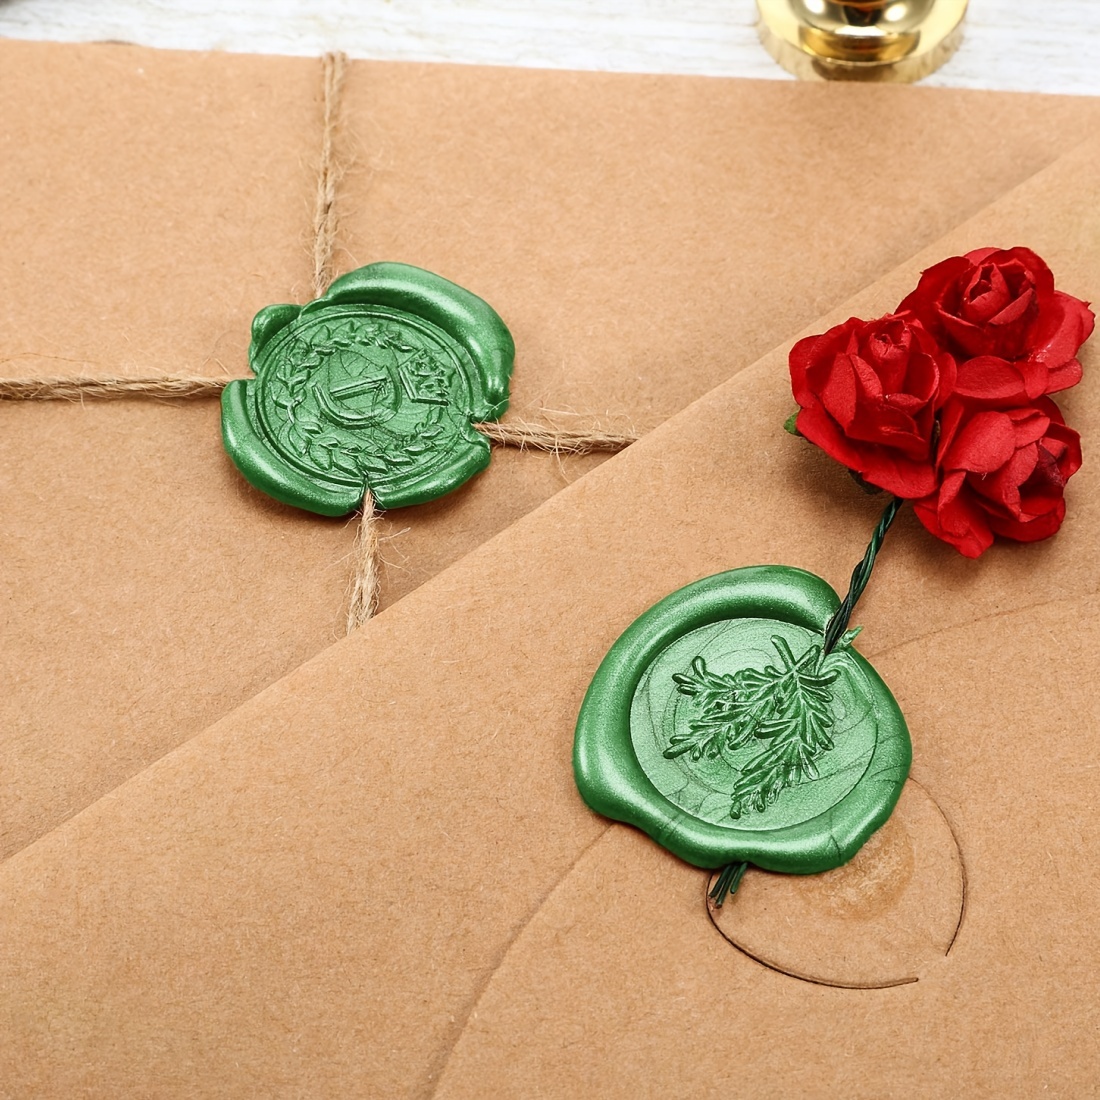 CRAPIRE Sealing Wax Sticks and Stamp Set 2Pcs Wax Seal Stamp Animals 8Pcs  Wax Seal Sticks with Wicks for Cards Envelopes Invitations Wine Packages